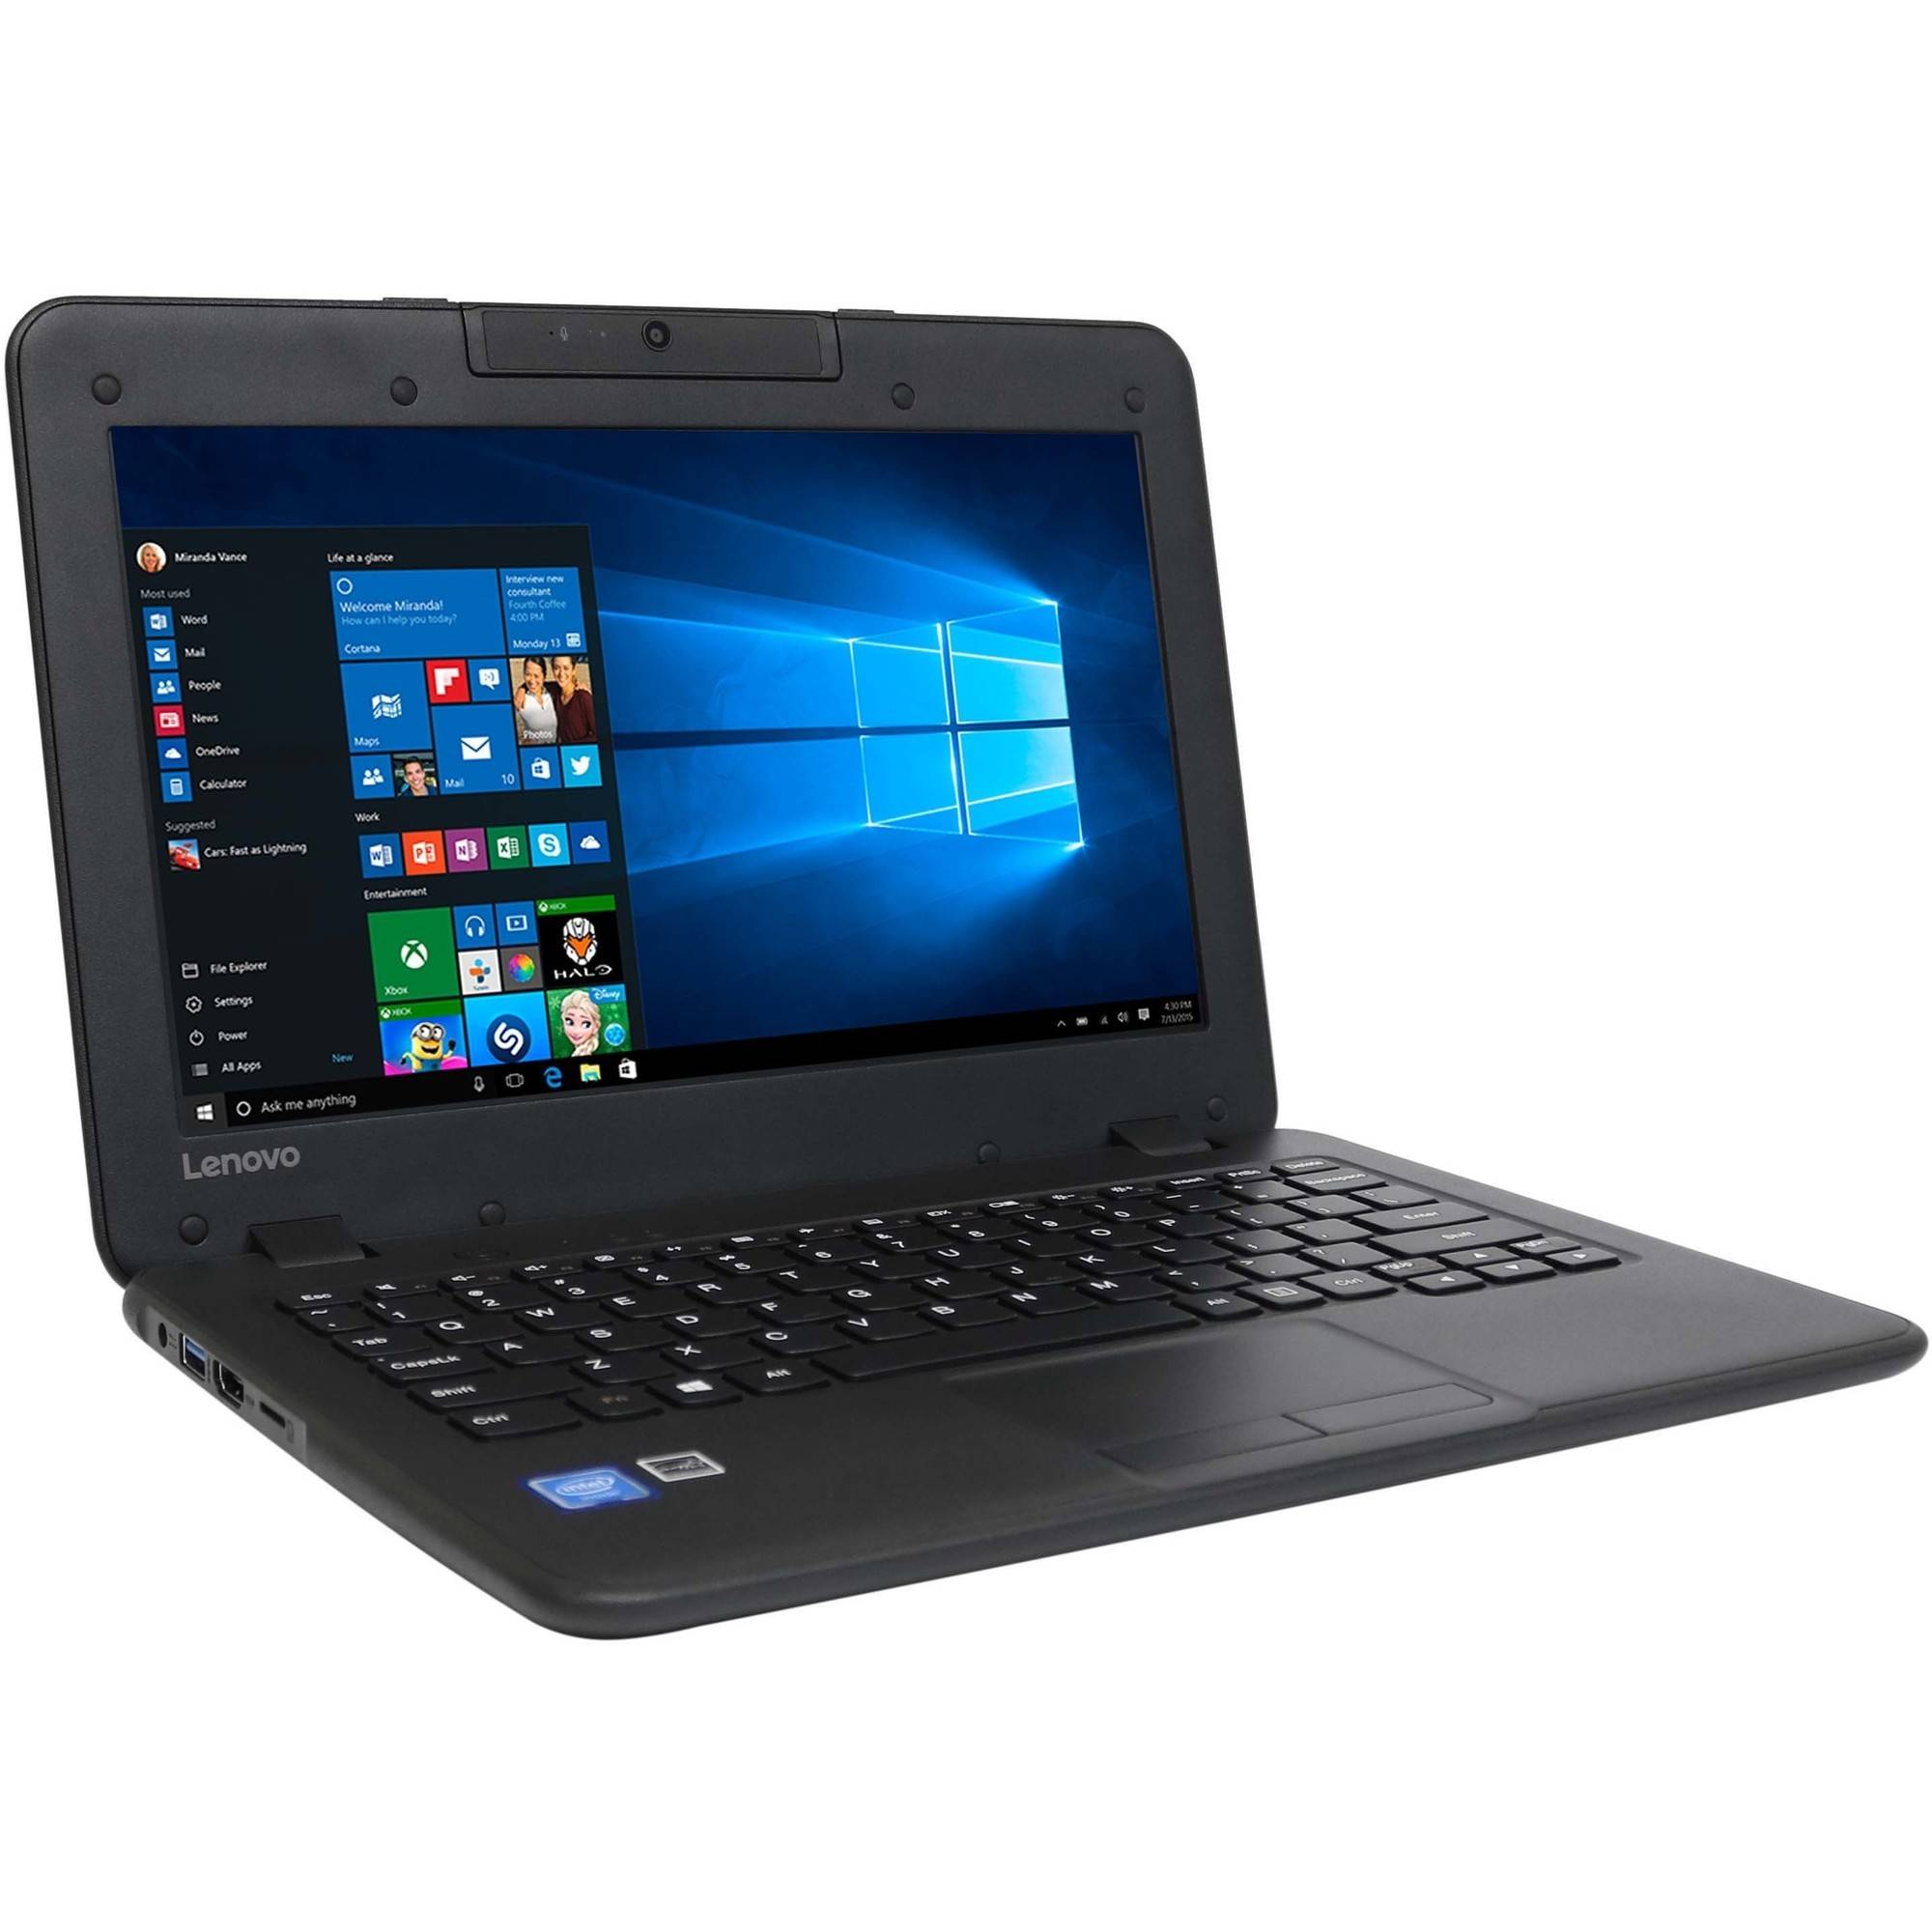 11.6″ Lenovo N22 laptop with Windows 10 Pro for $149